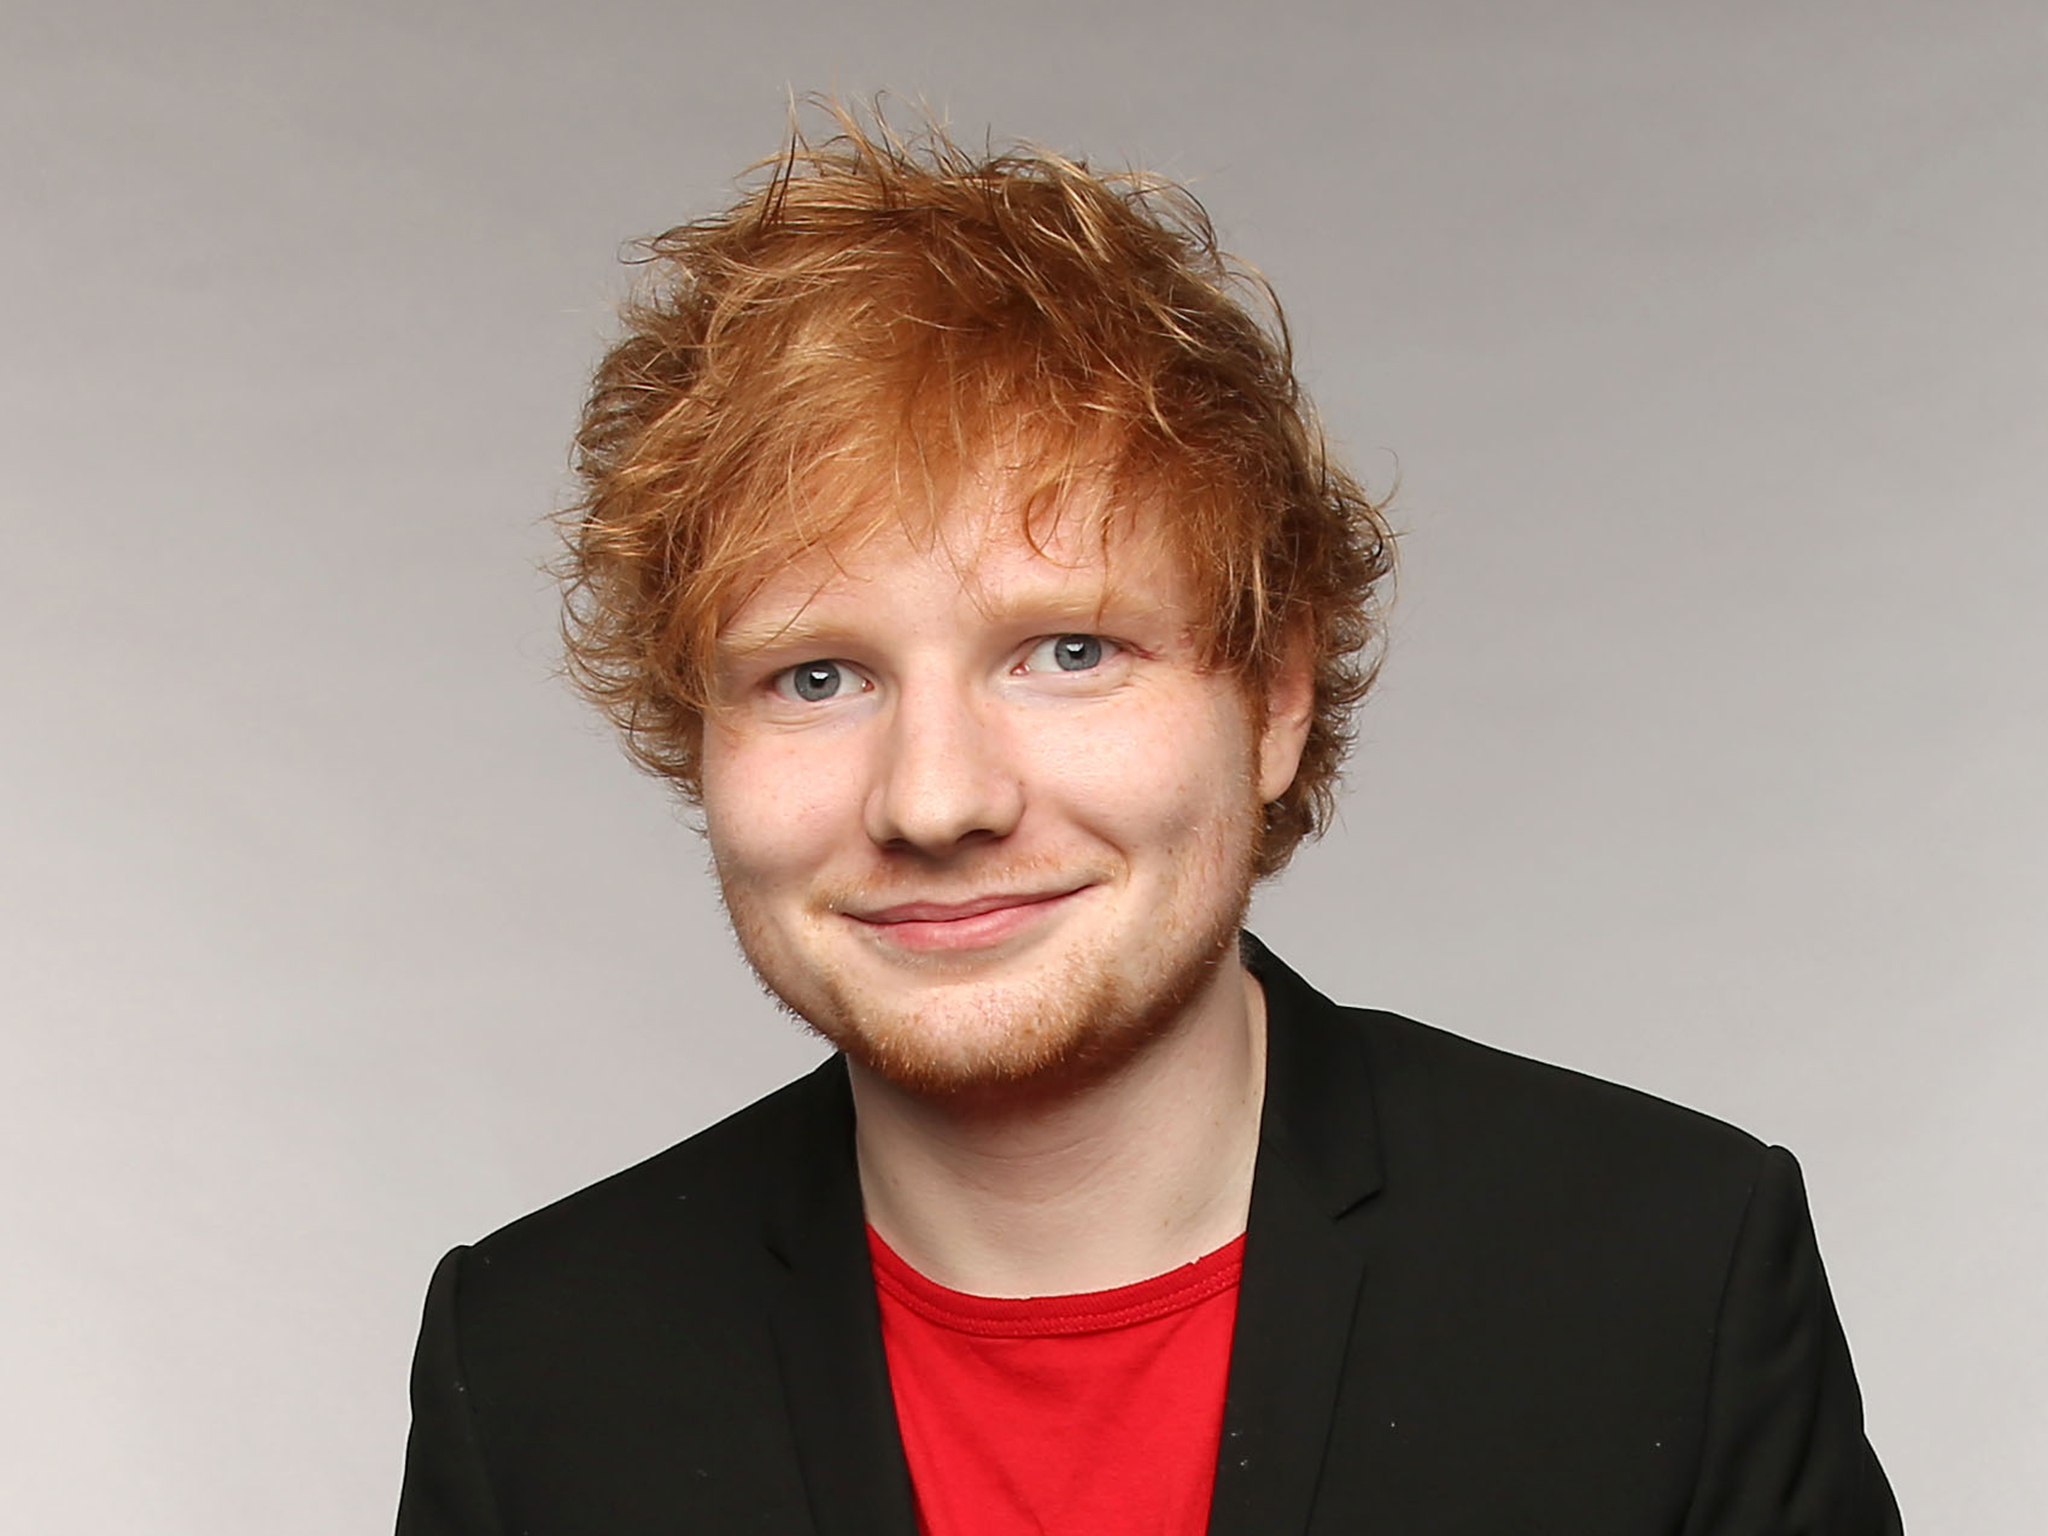 National Portrait Gallery acquires painting of Ed Sheeran